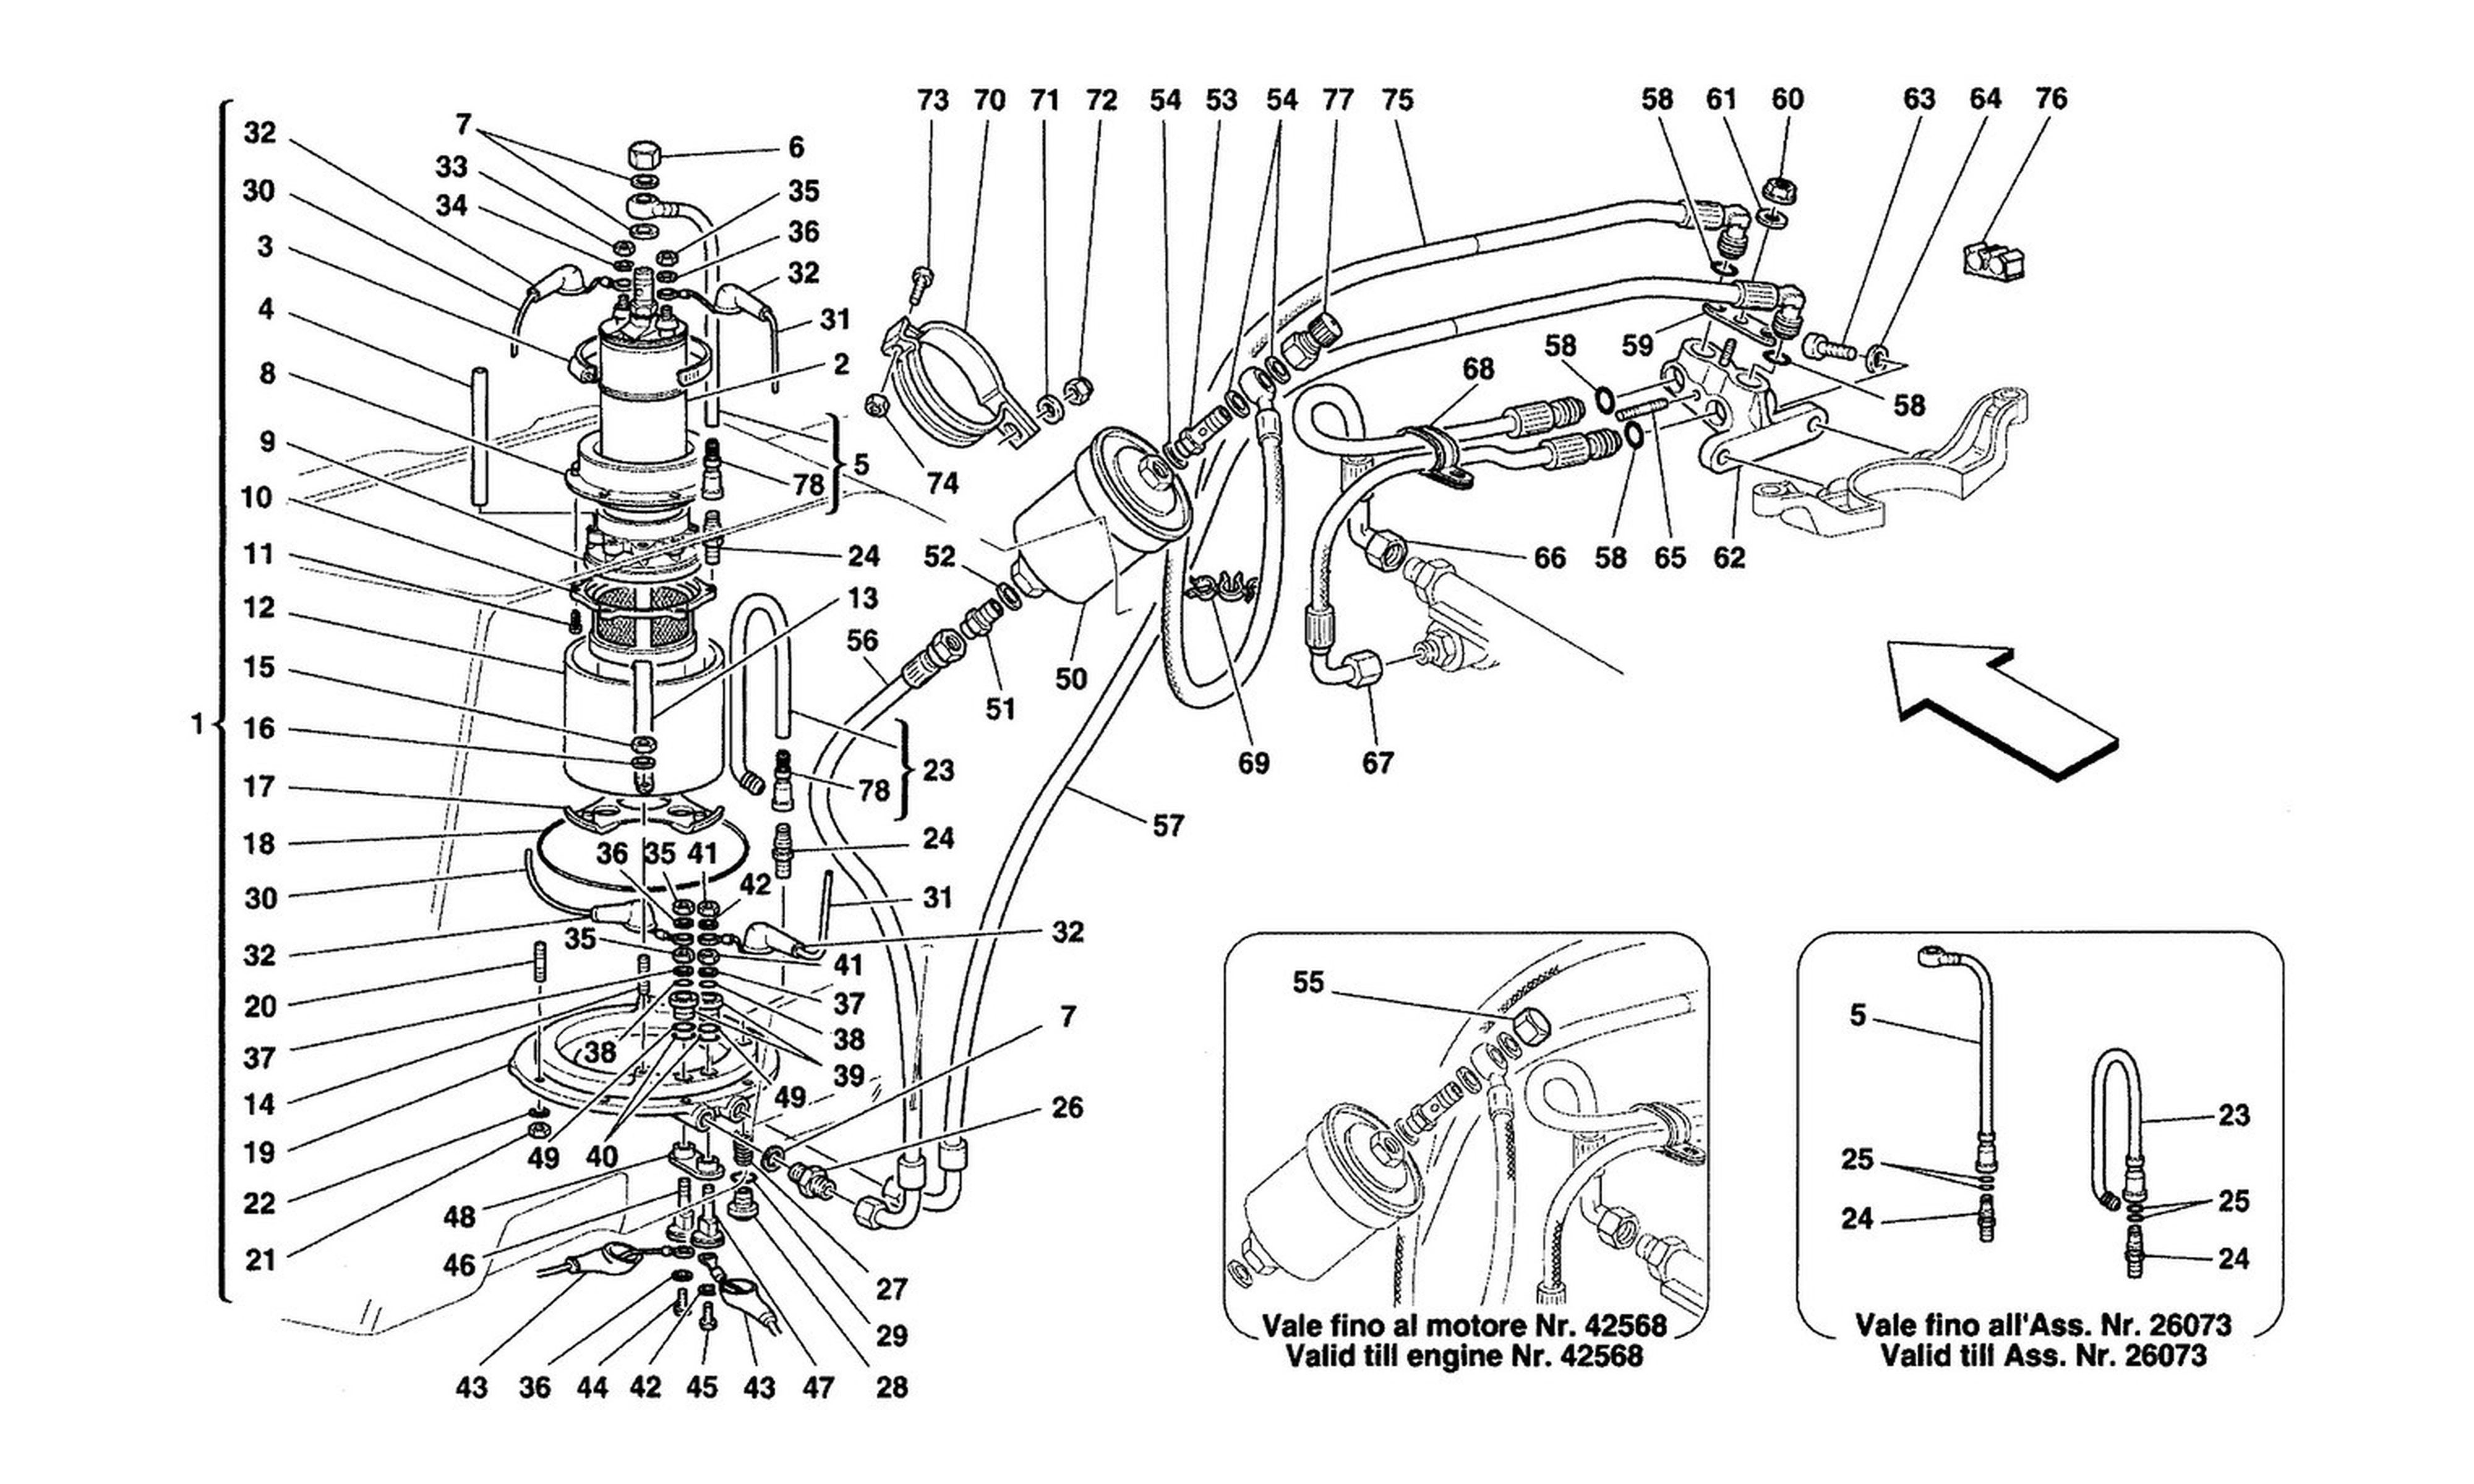 Schematic: Fuel Pump And Pipes